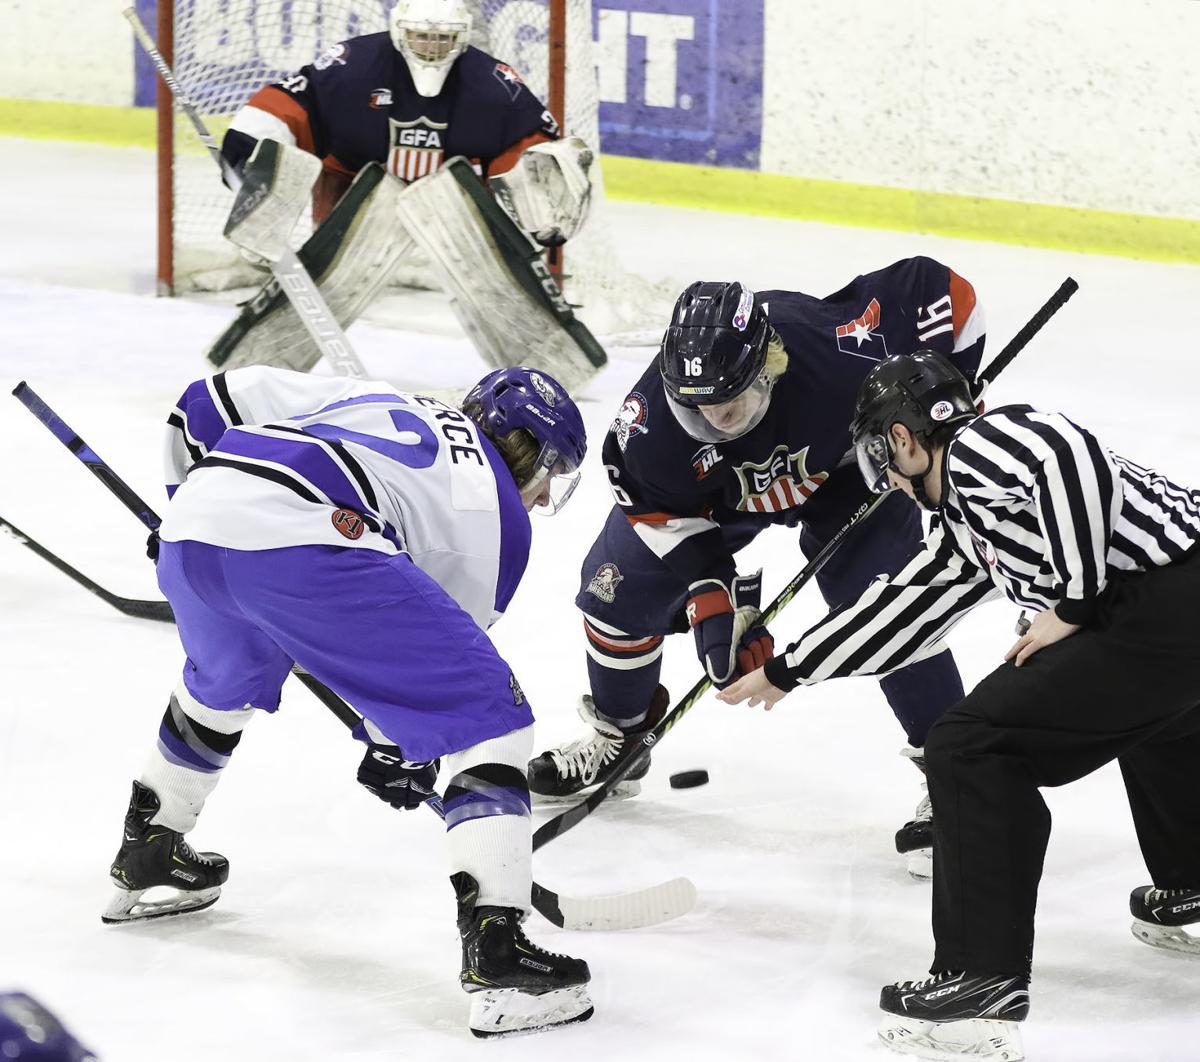 Helena Bighorns one game away from Fraser Cup with victory over Great Falls Americans | Hockey